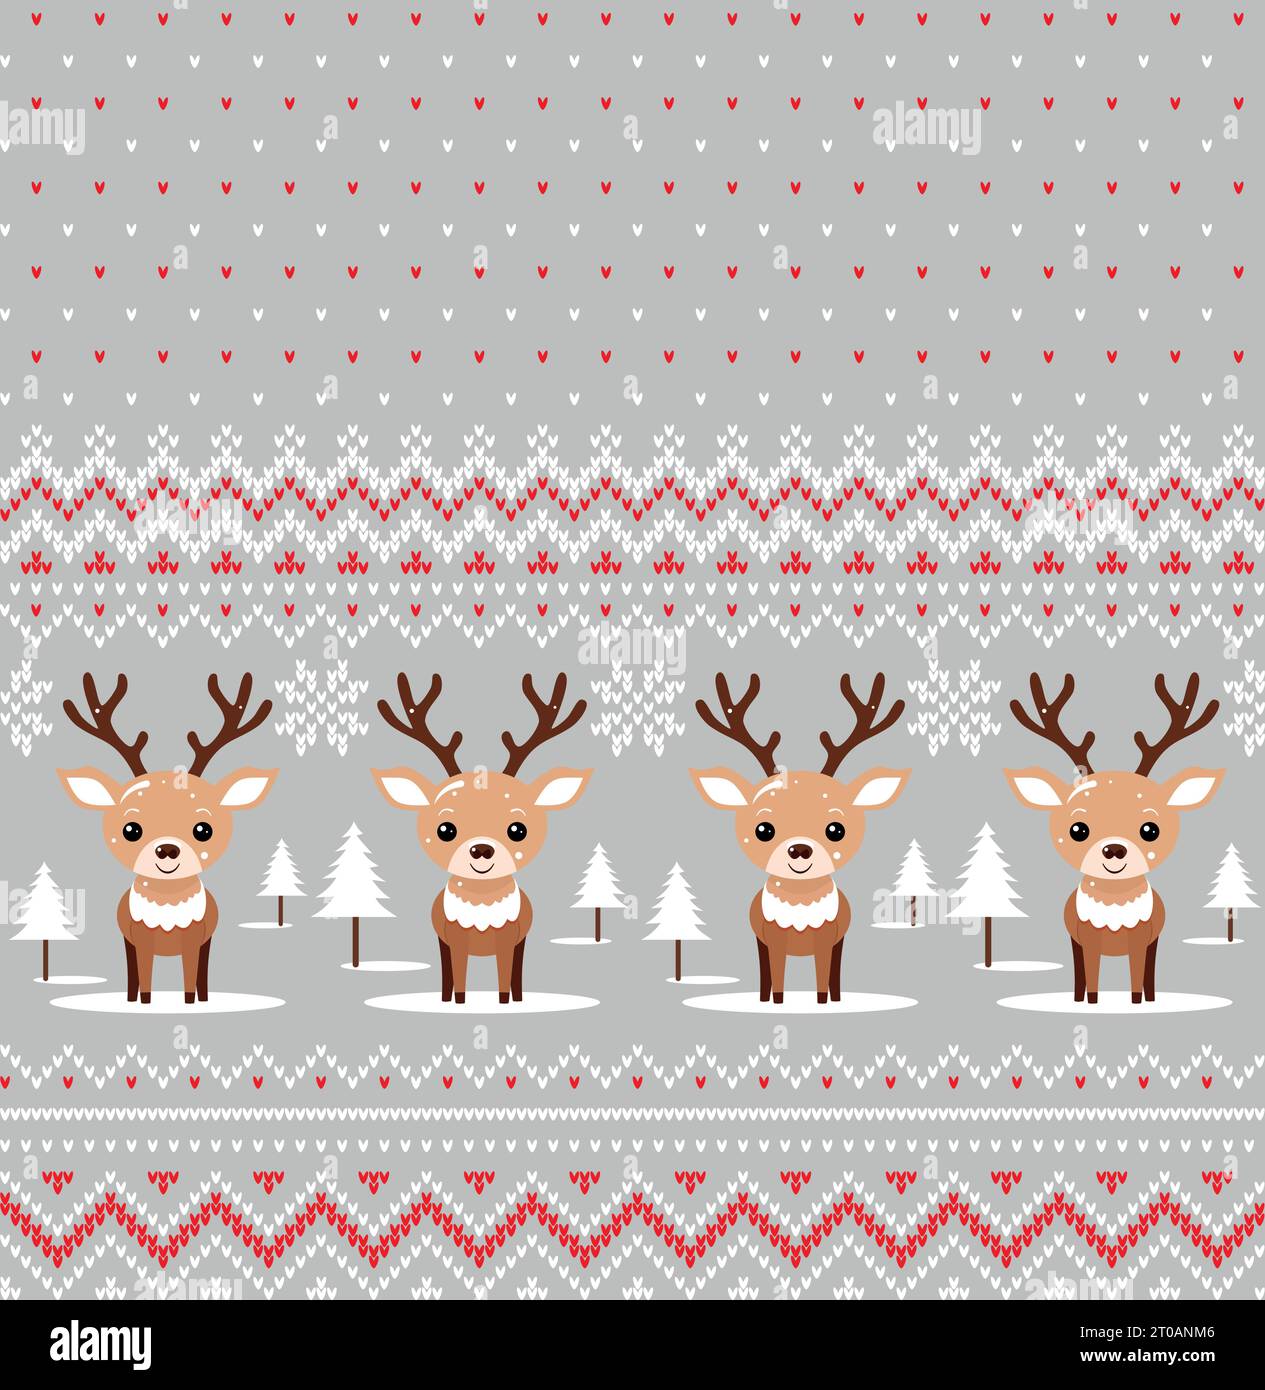 Knitted Christmas and New Year pattern into deer. Wool Knitting Sweater Design. Wallpaper wrapping paper textile print. Stock Vector